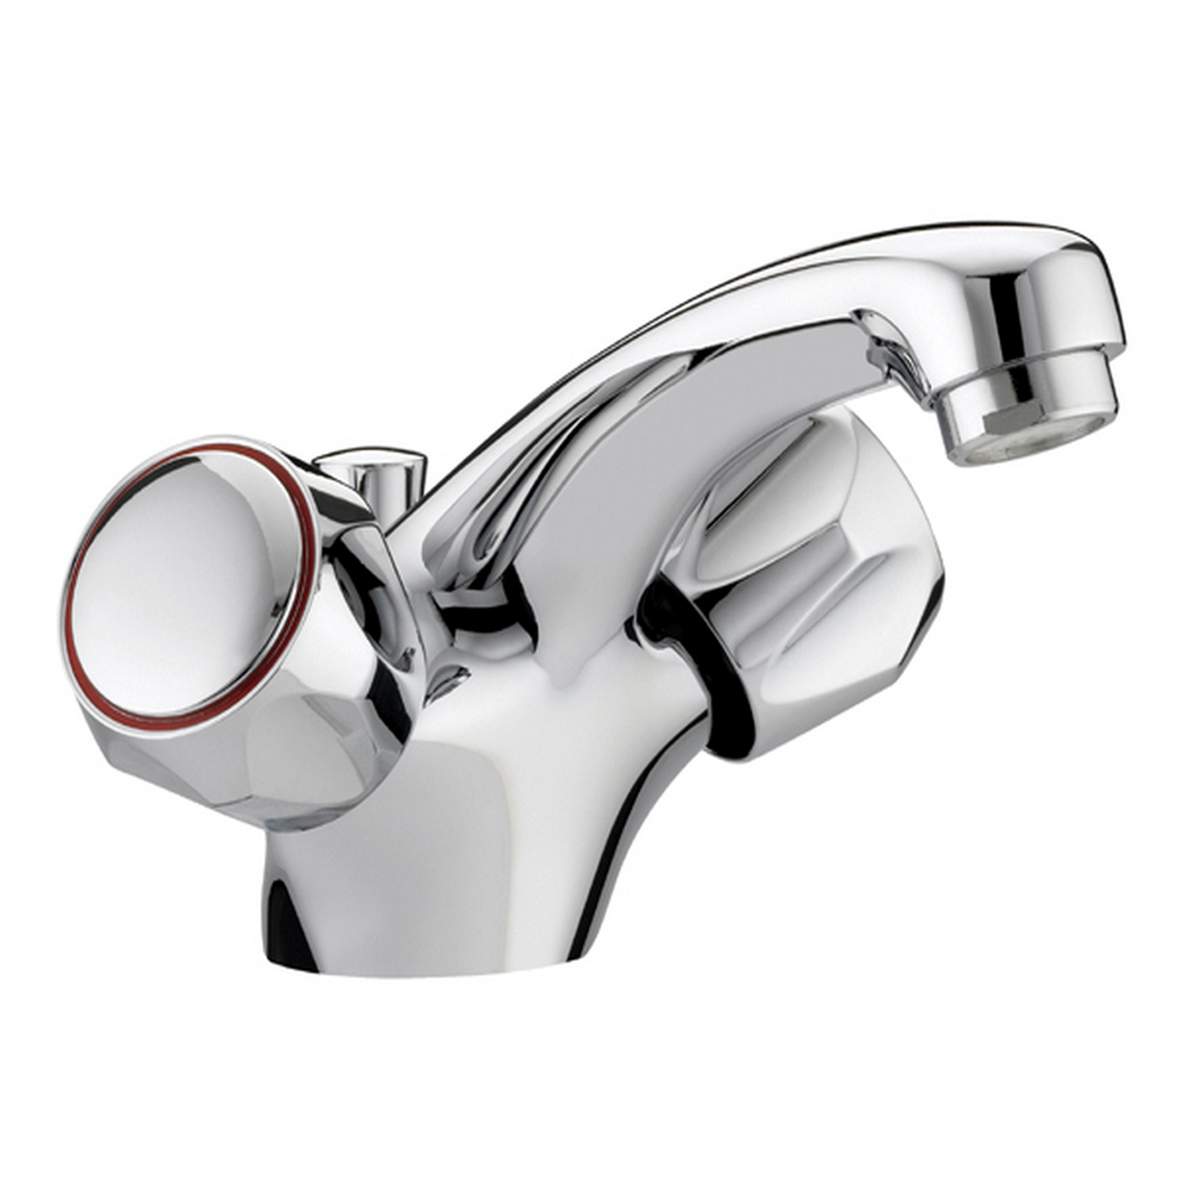 JTP Astra Basin Mixer with Pop Up Waste